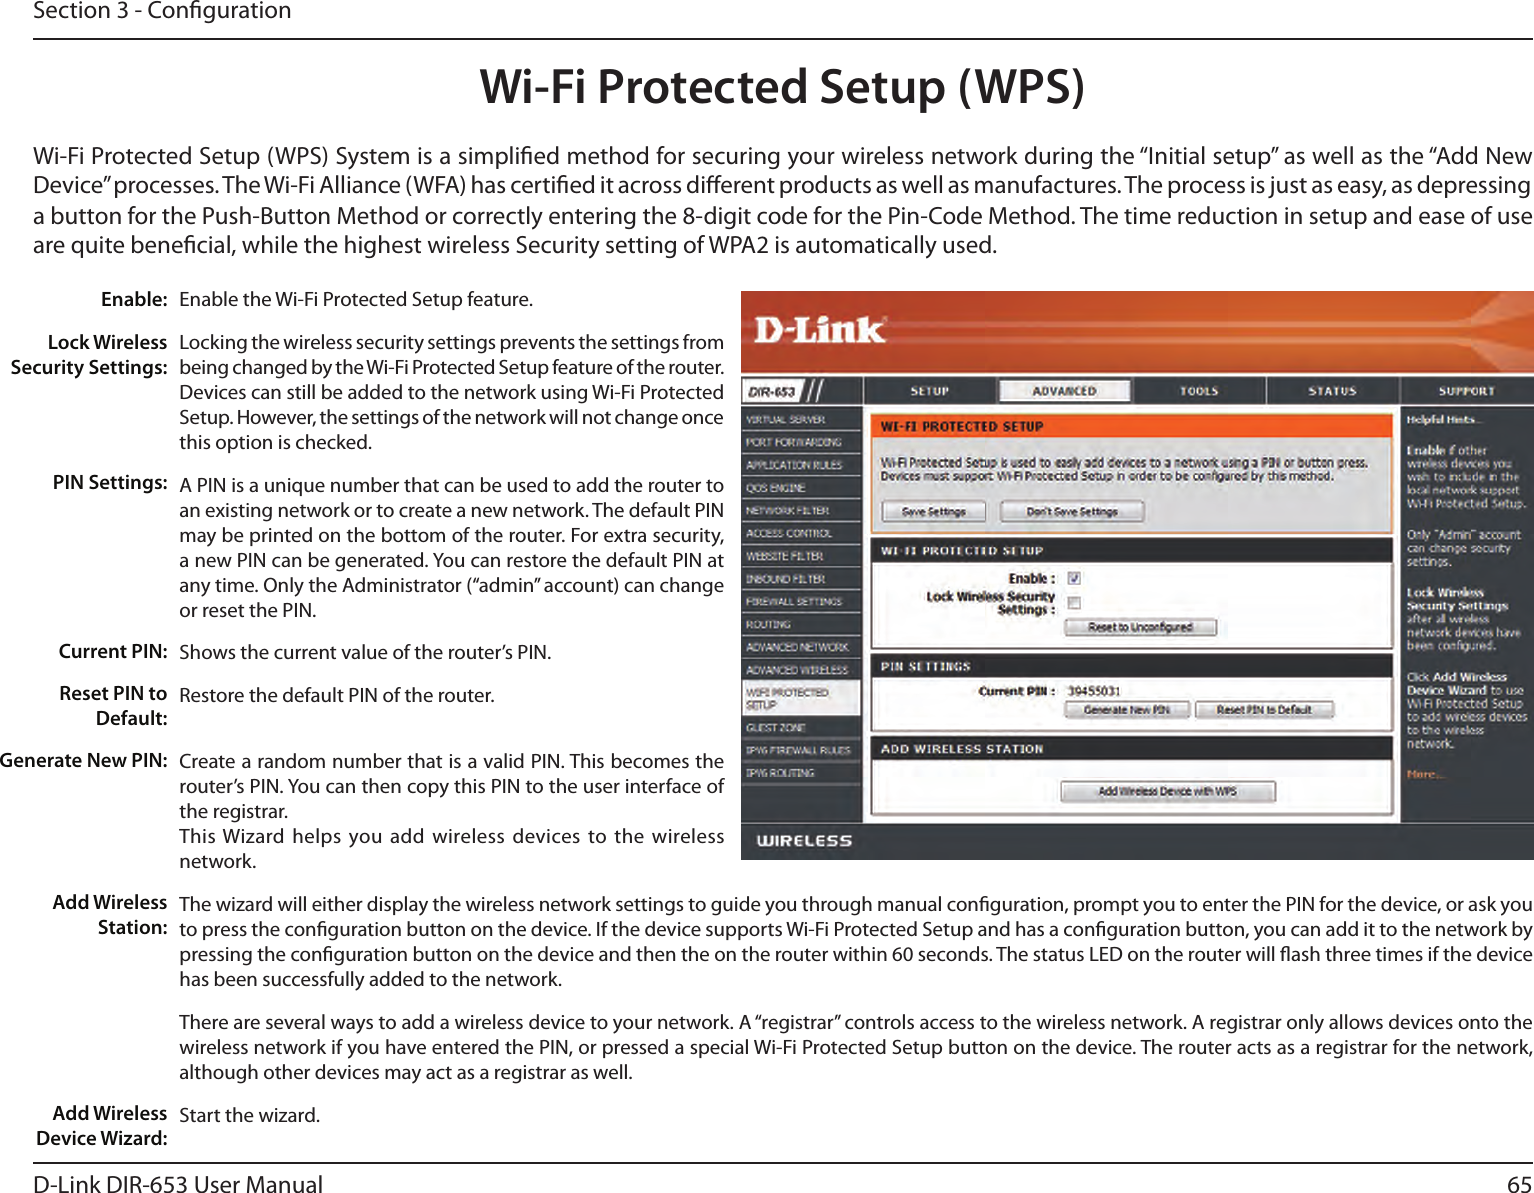 65D-Link DIR-653 User ManualSection 3 - CongurationWi-Fi Protected Setup (WPS)Enable the Wi-Fi Protected Setup feature. Locking the wireless security settings prevents the settings from being changed by the Wi-Fi Protected Setup feature of the router. Devices can still be added to the network using Wi-Fi Protected Setup. However, the settings of the network will not change once this option is checked.A PIN is a unique number that can be used to add the router to an existing network or to create a new network. The default PIN may be printed on the bottom of the router. For extra security, a new PIN can be generated. You can restore the default PIN at any time. Only the Administrator (“admin” account) can change or reset the PIN. Shows the current value of the router’s PIN. Restore the default PIN of the router. Create a random number that is a valid PIN. This becomes the router’s PIN. You can then copy this PIN to the user interface of the registrar.This Wizard helps you  add wireless  devices to the wireless network.The wizard will either display the wireless network settings to guide you through manual conguration, prompt you to enter the PIN for the device, or ask you to press the conguration button on the device. If the device supports Wi-Fi Protected Setup and has a conguration button, you can add it to the network by pressing the conguration button on the device and then the on the router within 60 seconds. The status LED on the router will ash three times if the device has been successfully added to the network.There are several ways to add a wireless device to your network. A “registrar” controls access to the wireless network. A registrar only allows devices onto the wireless network if you have entered the PIN, or pressed a special Wi-Fi Protected Setup button on the device. The router acts as a registrar for the network, although other devices may act as a registrar as well.Start the wizard.Enable:Lock Wireless Security Settings:PIN Settings:Current PIN:Reset PIN to Default:Generate New PIN:Add Wireless Station:Add Wireless Device Wizard:Wi-Fi Protected Setup (WPS) System is a simplied method for securing your wireless network during the “Initial setup” as well as the “Add New Device” processes. The Wi-Fi Alliance (WFA) has certied it across dierent products as well as manufactures. The process is just as easy, as depressing a button for the Push-Button Method or correctly entering the 8-digit code for the Pin-Code Method. The time reduction in setup and ease of use are quite benecial, while the highest wireless Security setting of WPA2 is automatically used.